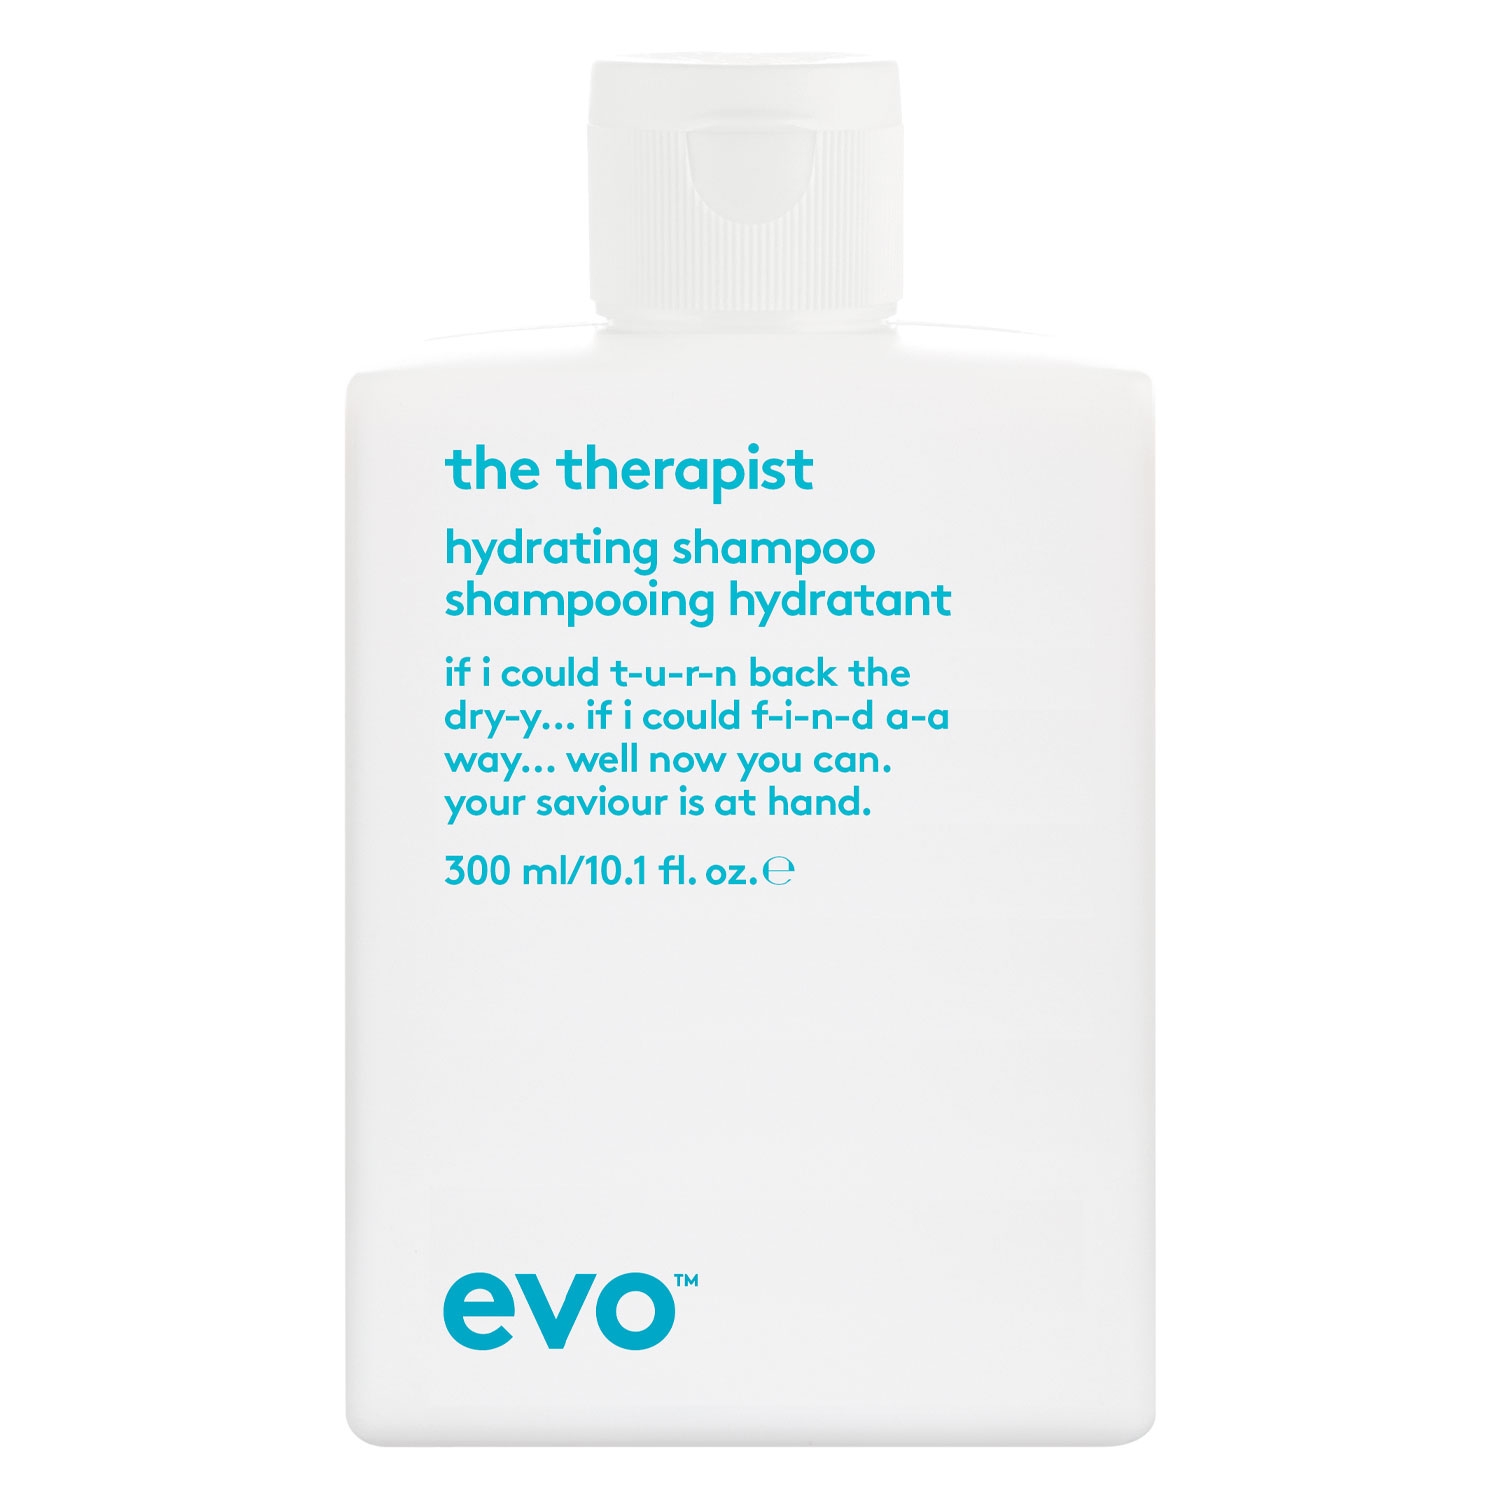 Product image from evo calm - the therapist hydrating shampoo